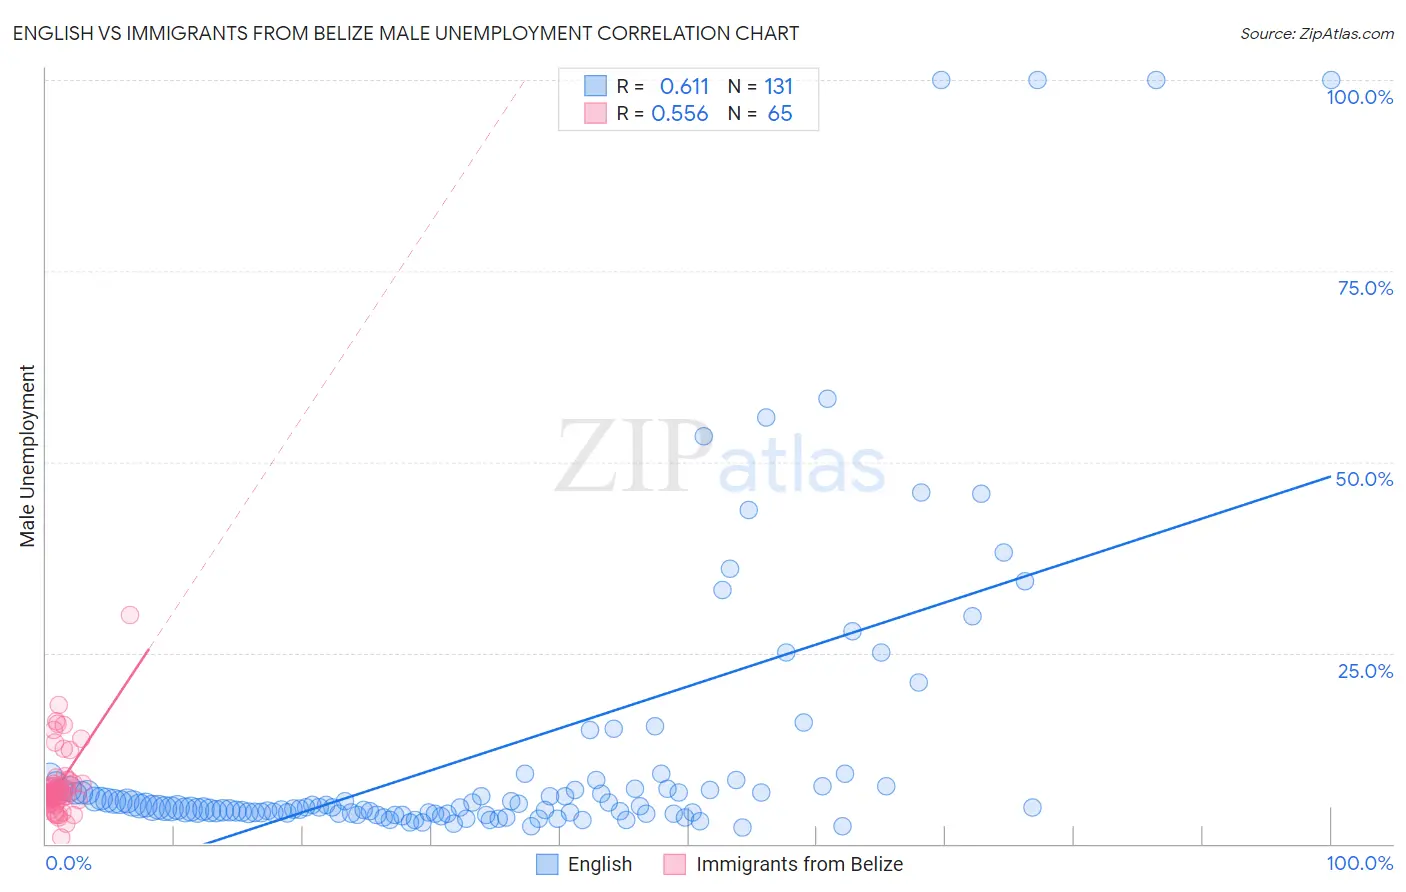 English vs Immigrants from Belize Male Unemployment